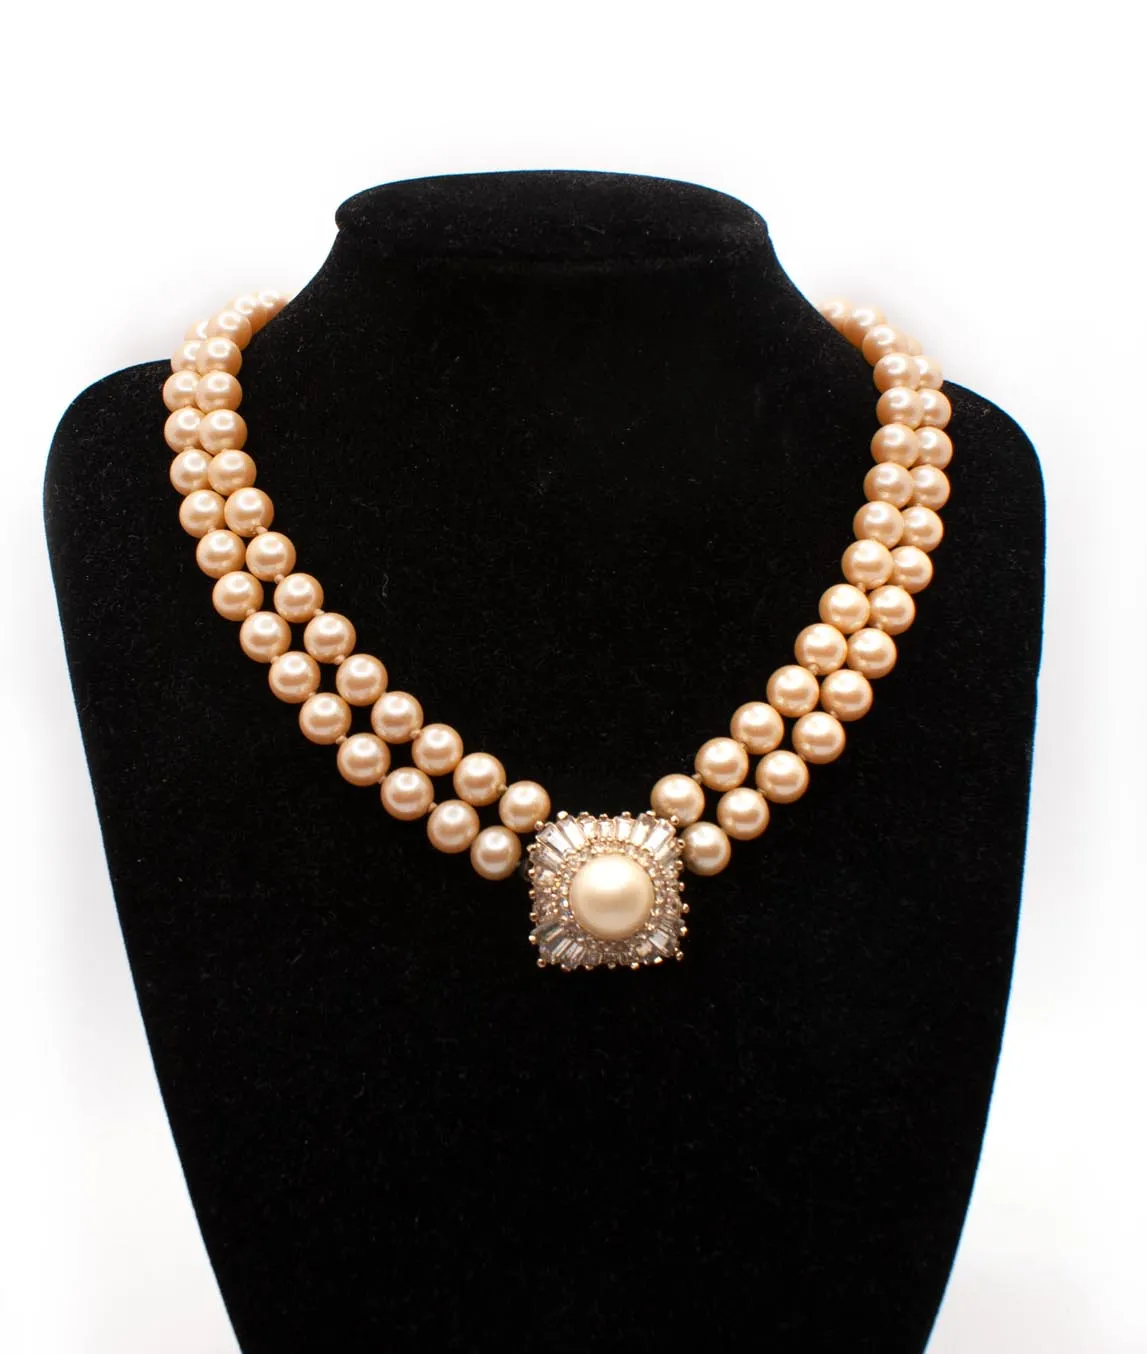 Champagne faux pearl necklace by Panetta on a black display bust